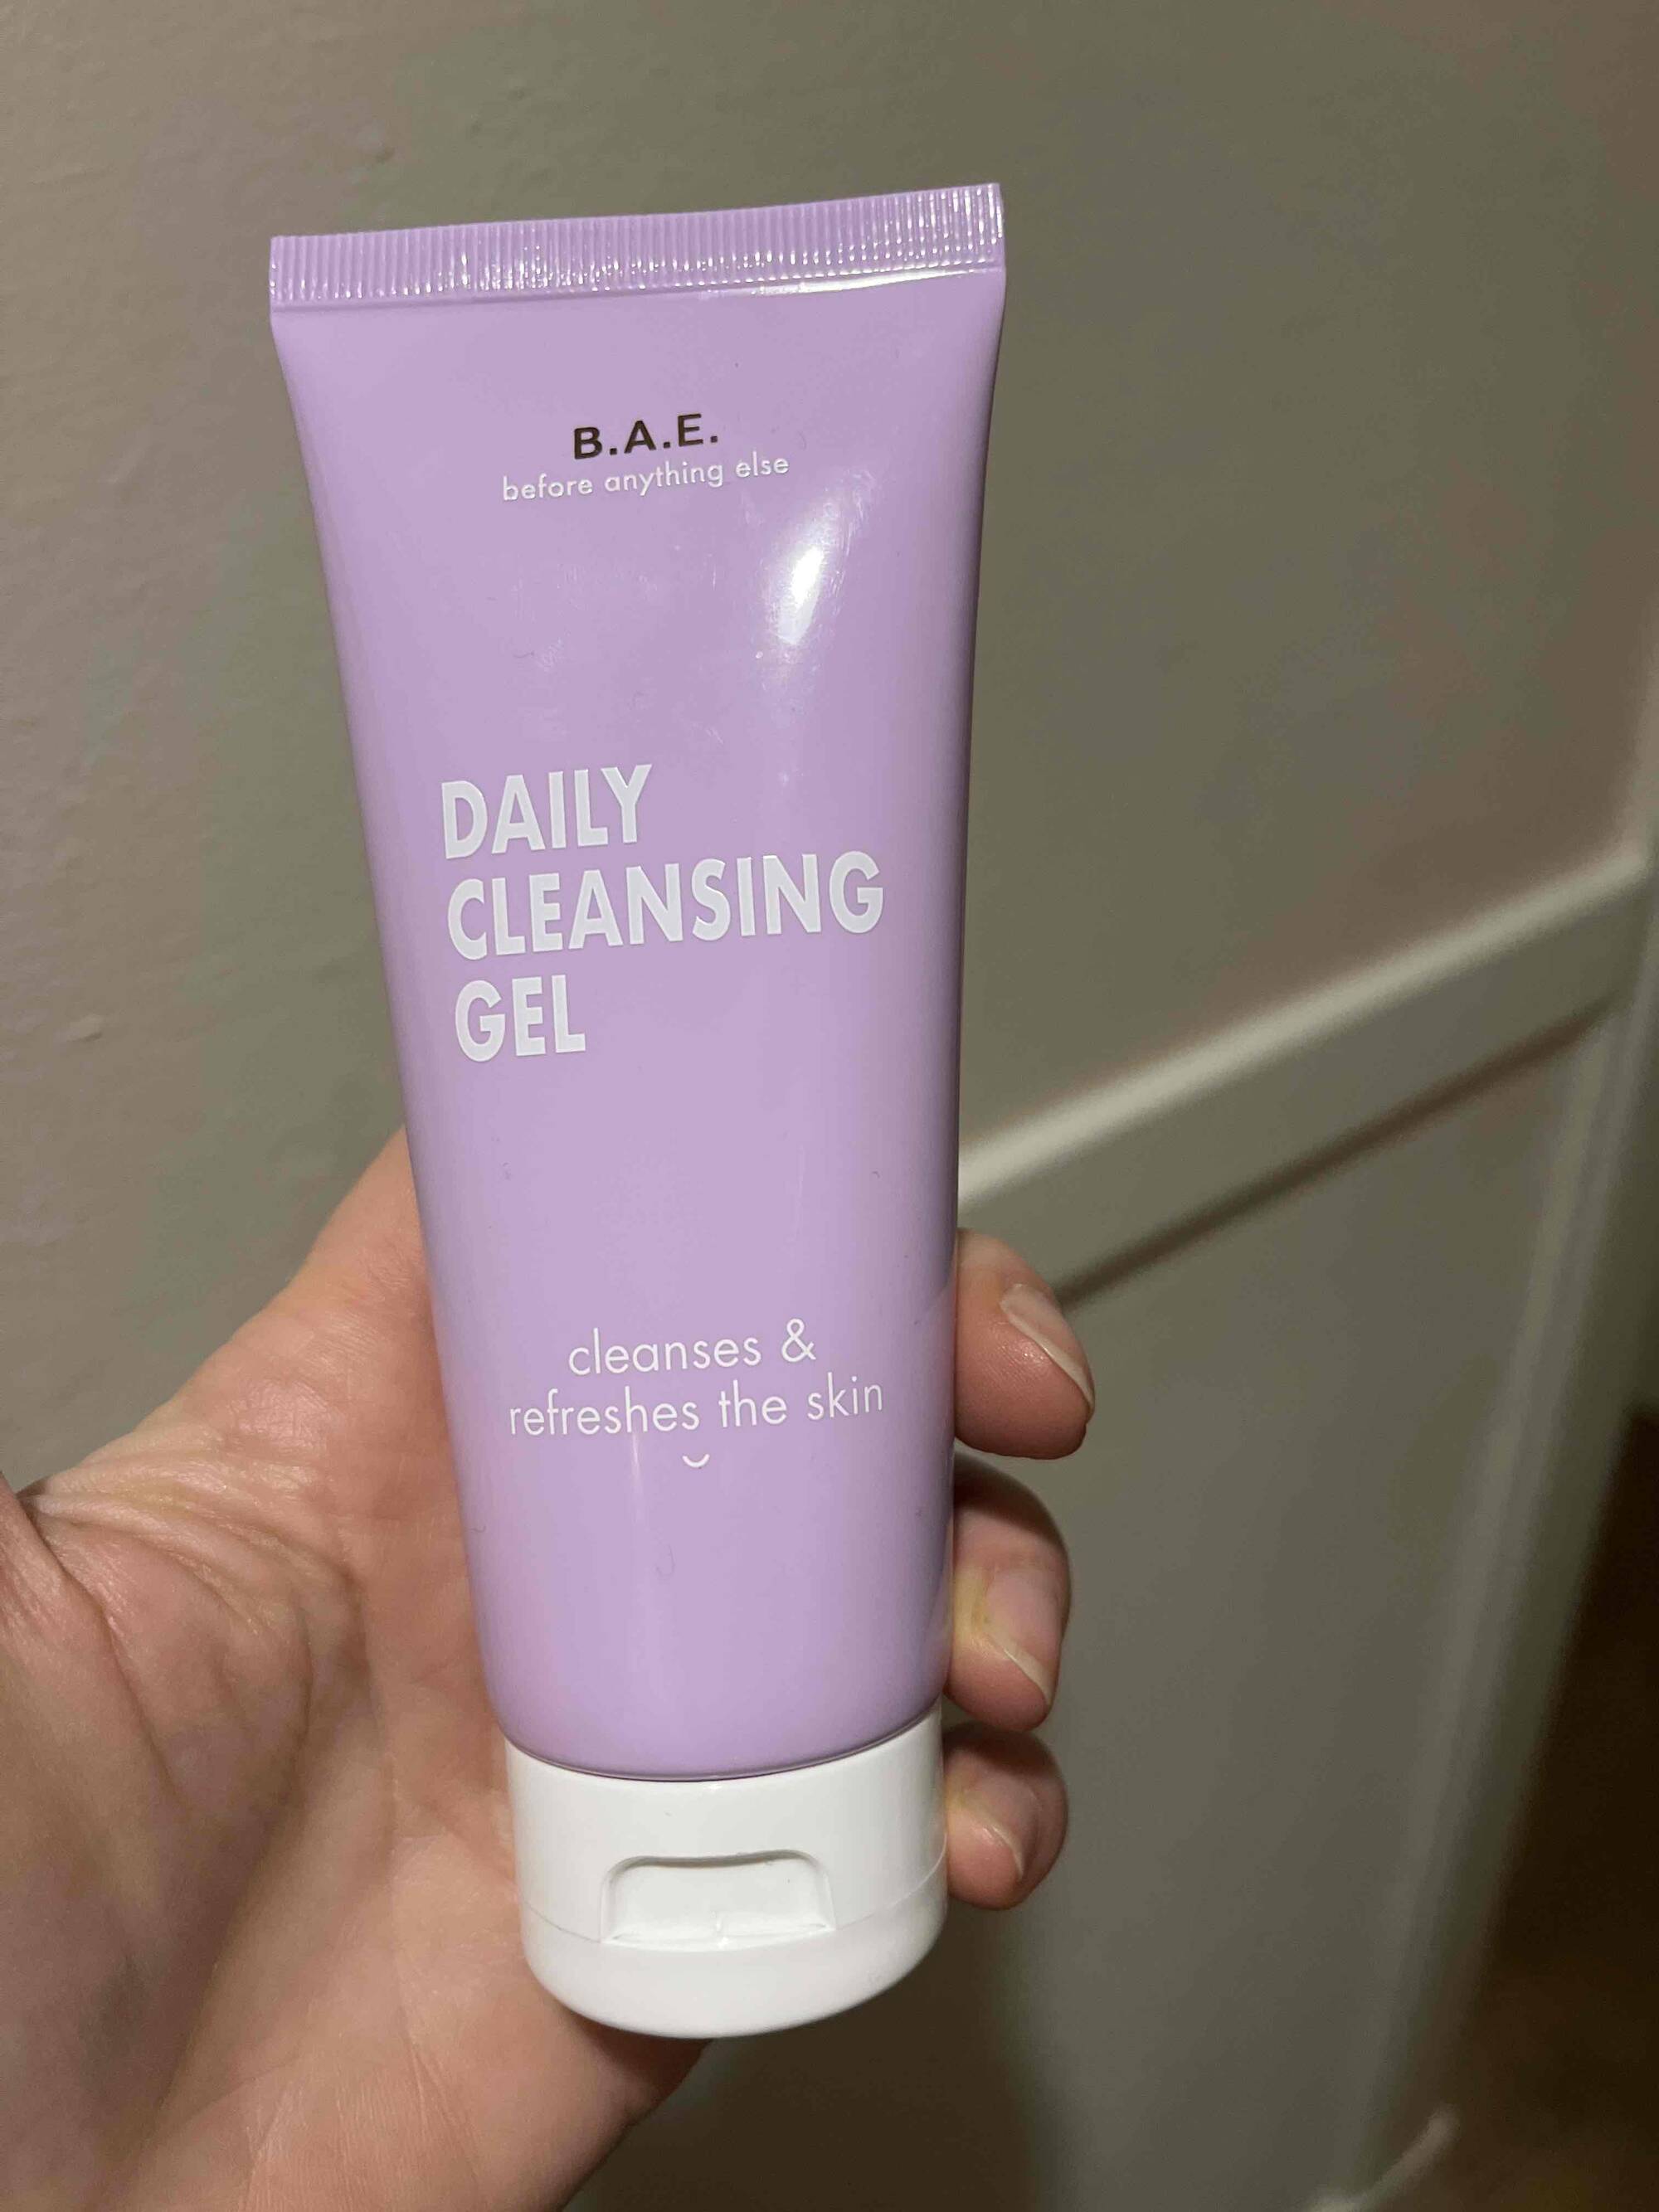 B.A.E - Daily cleansing gel